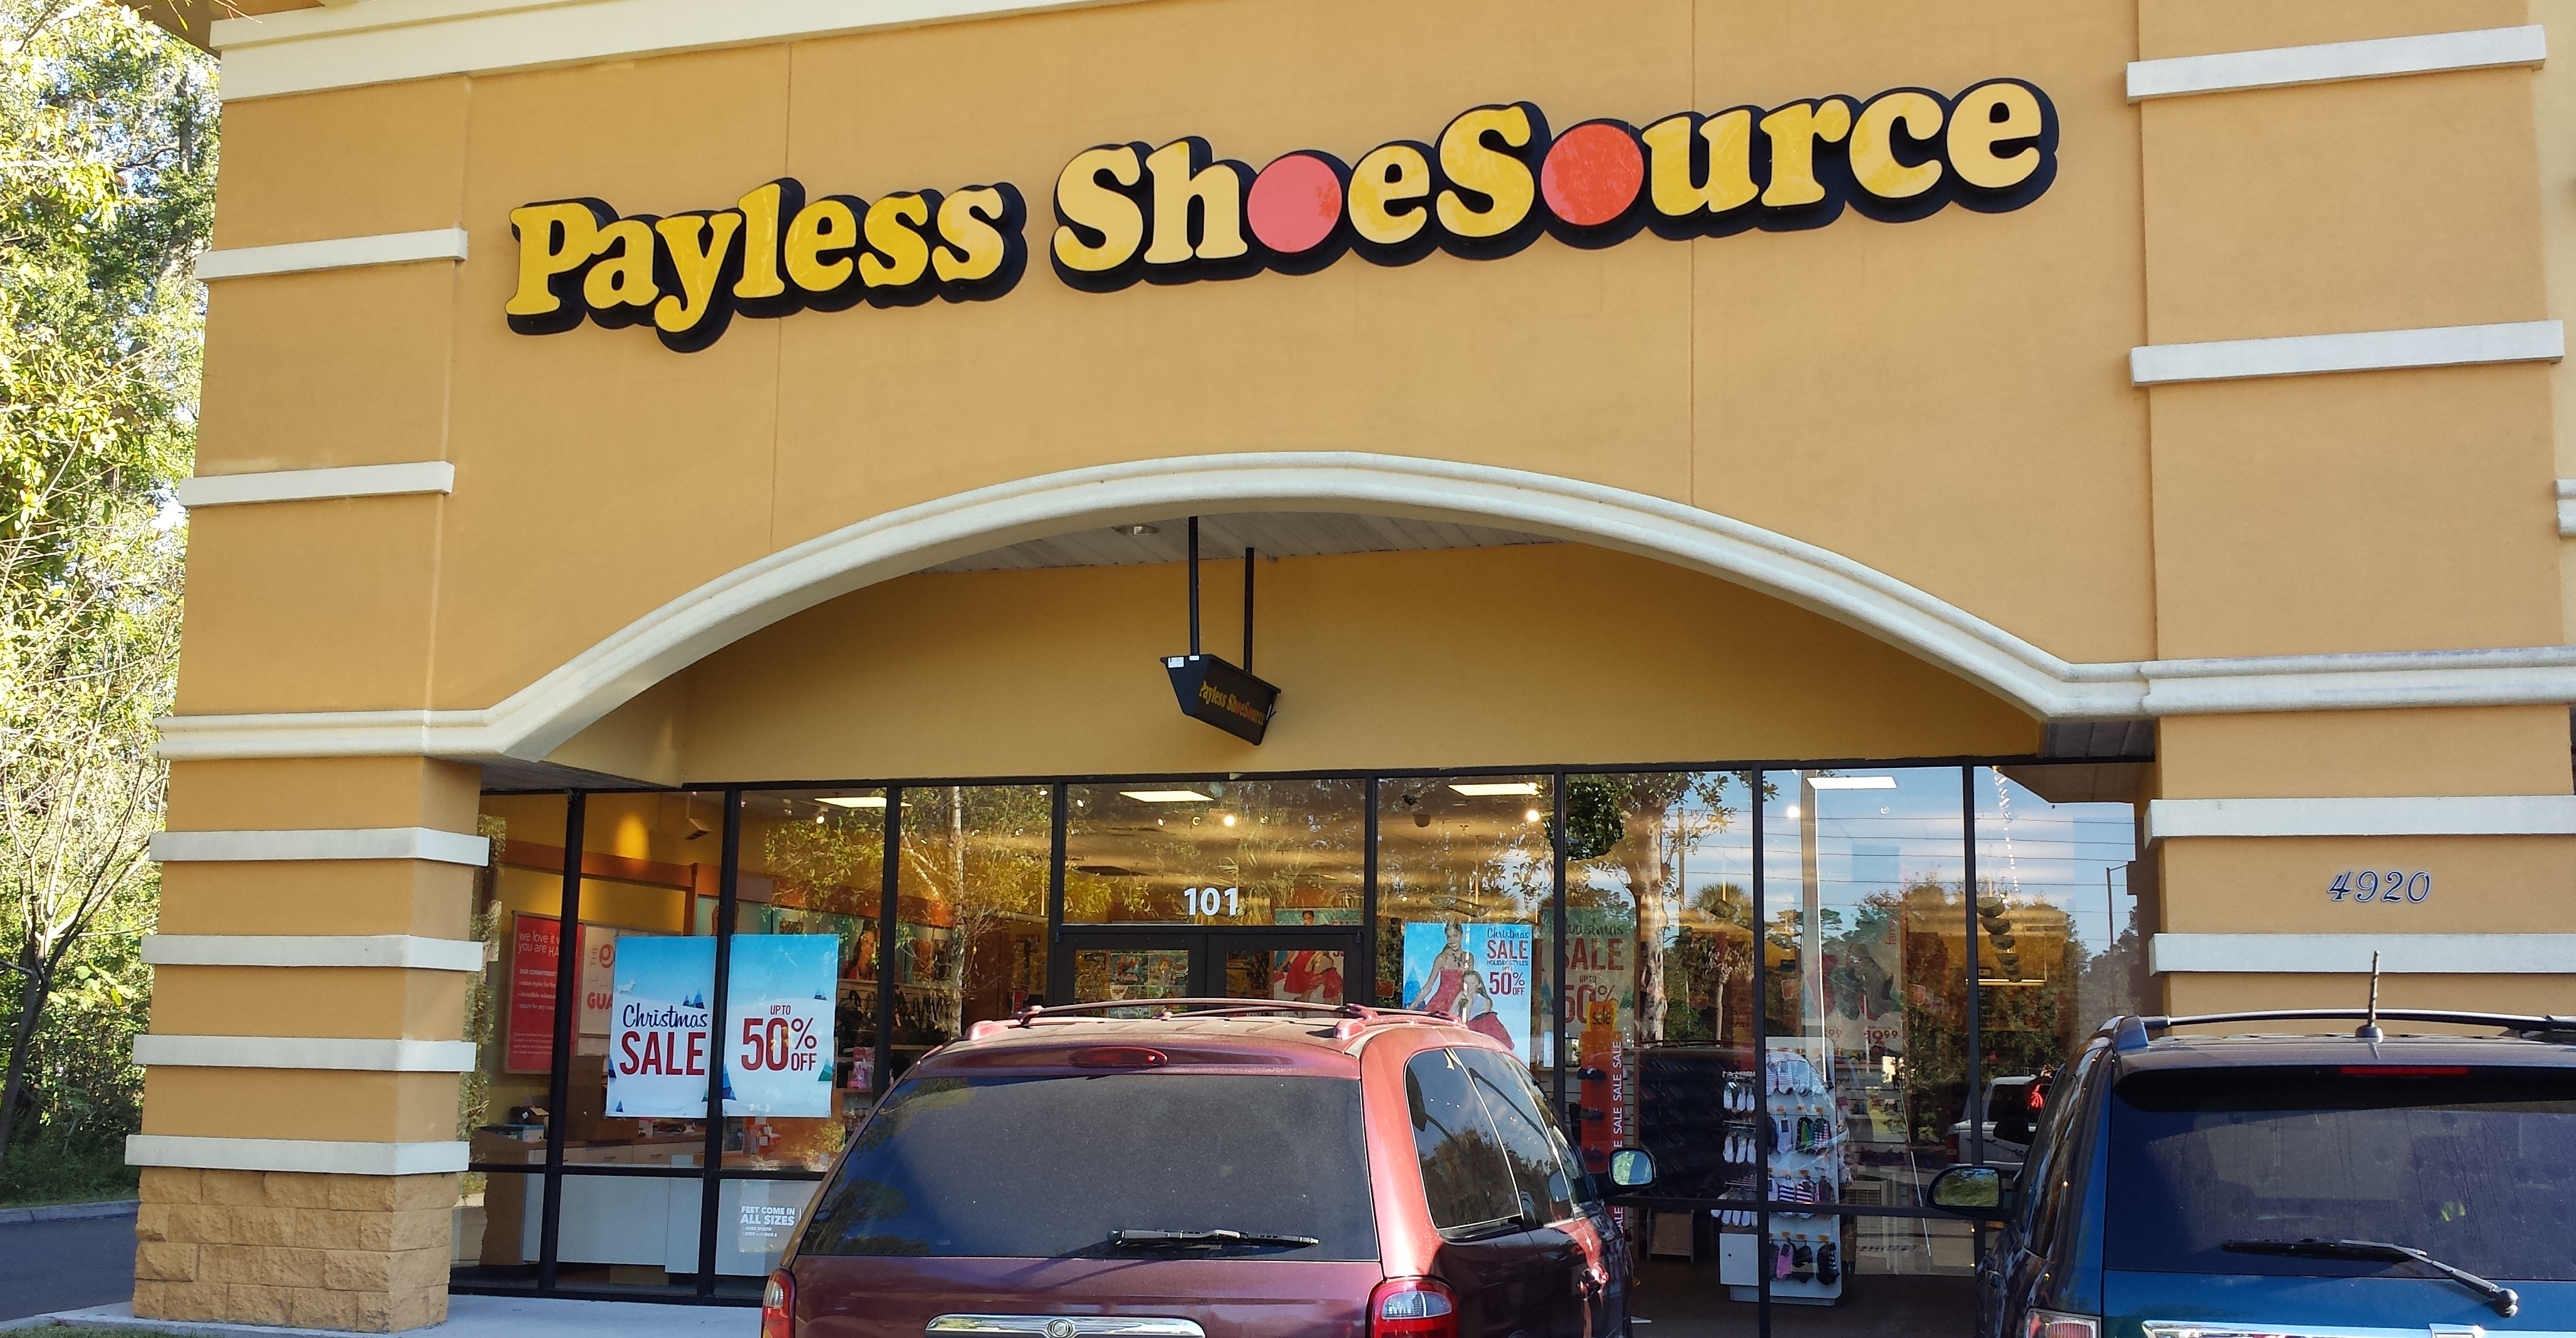 Credit Union members enjoyed an extra 10% off at Payless Shoe ...